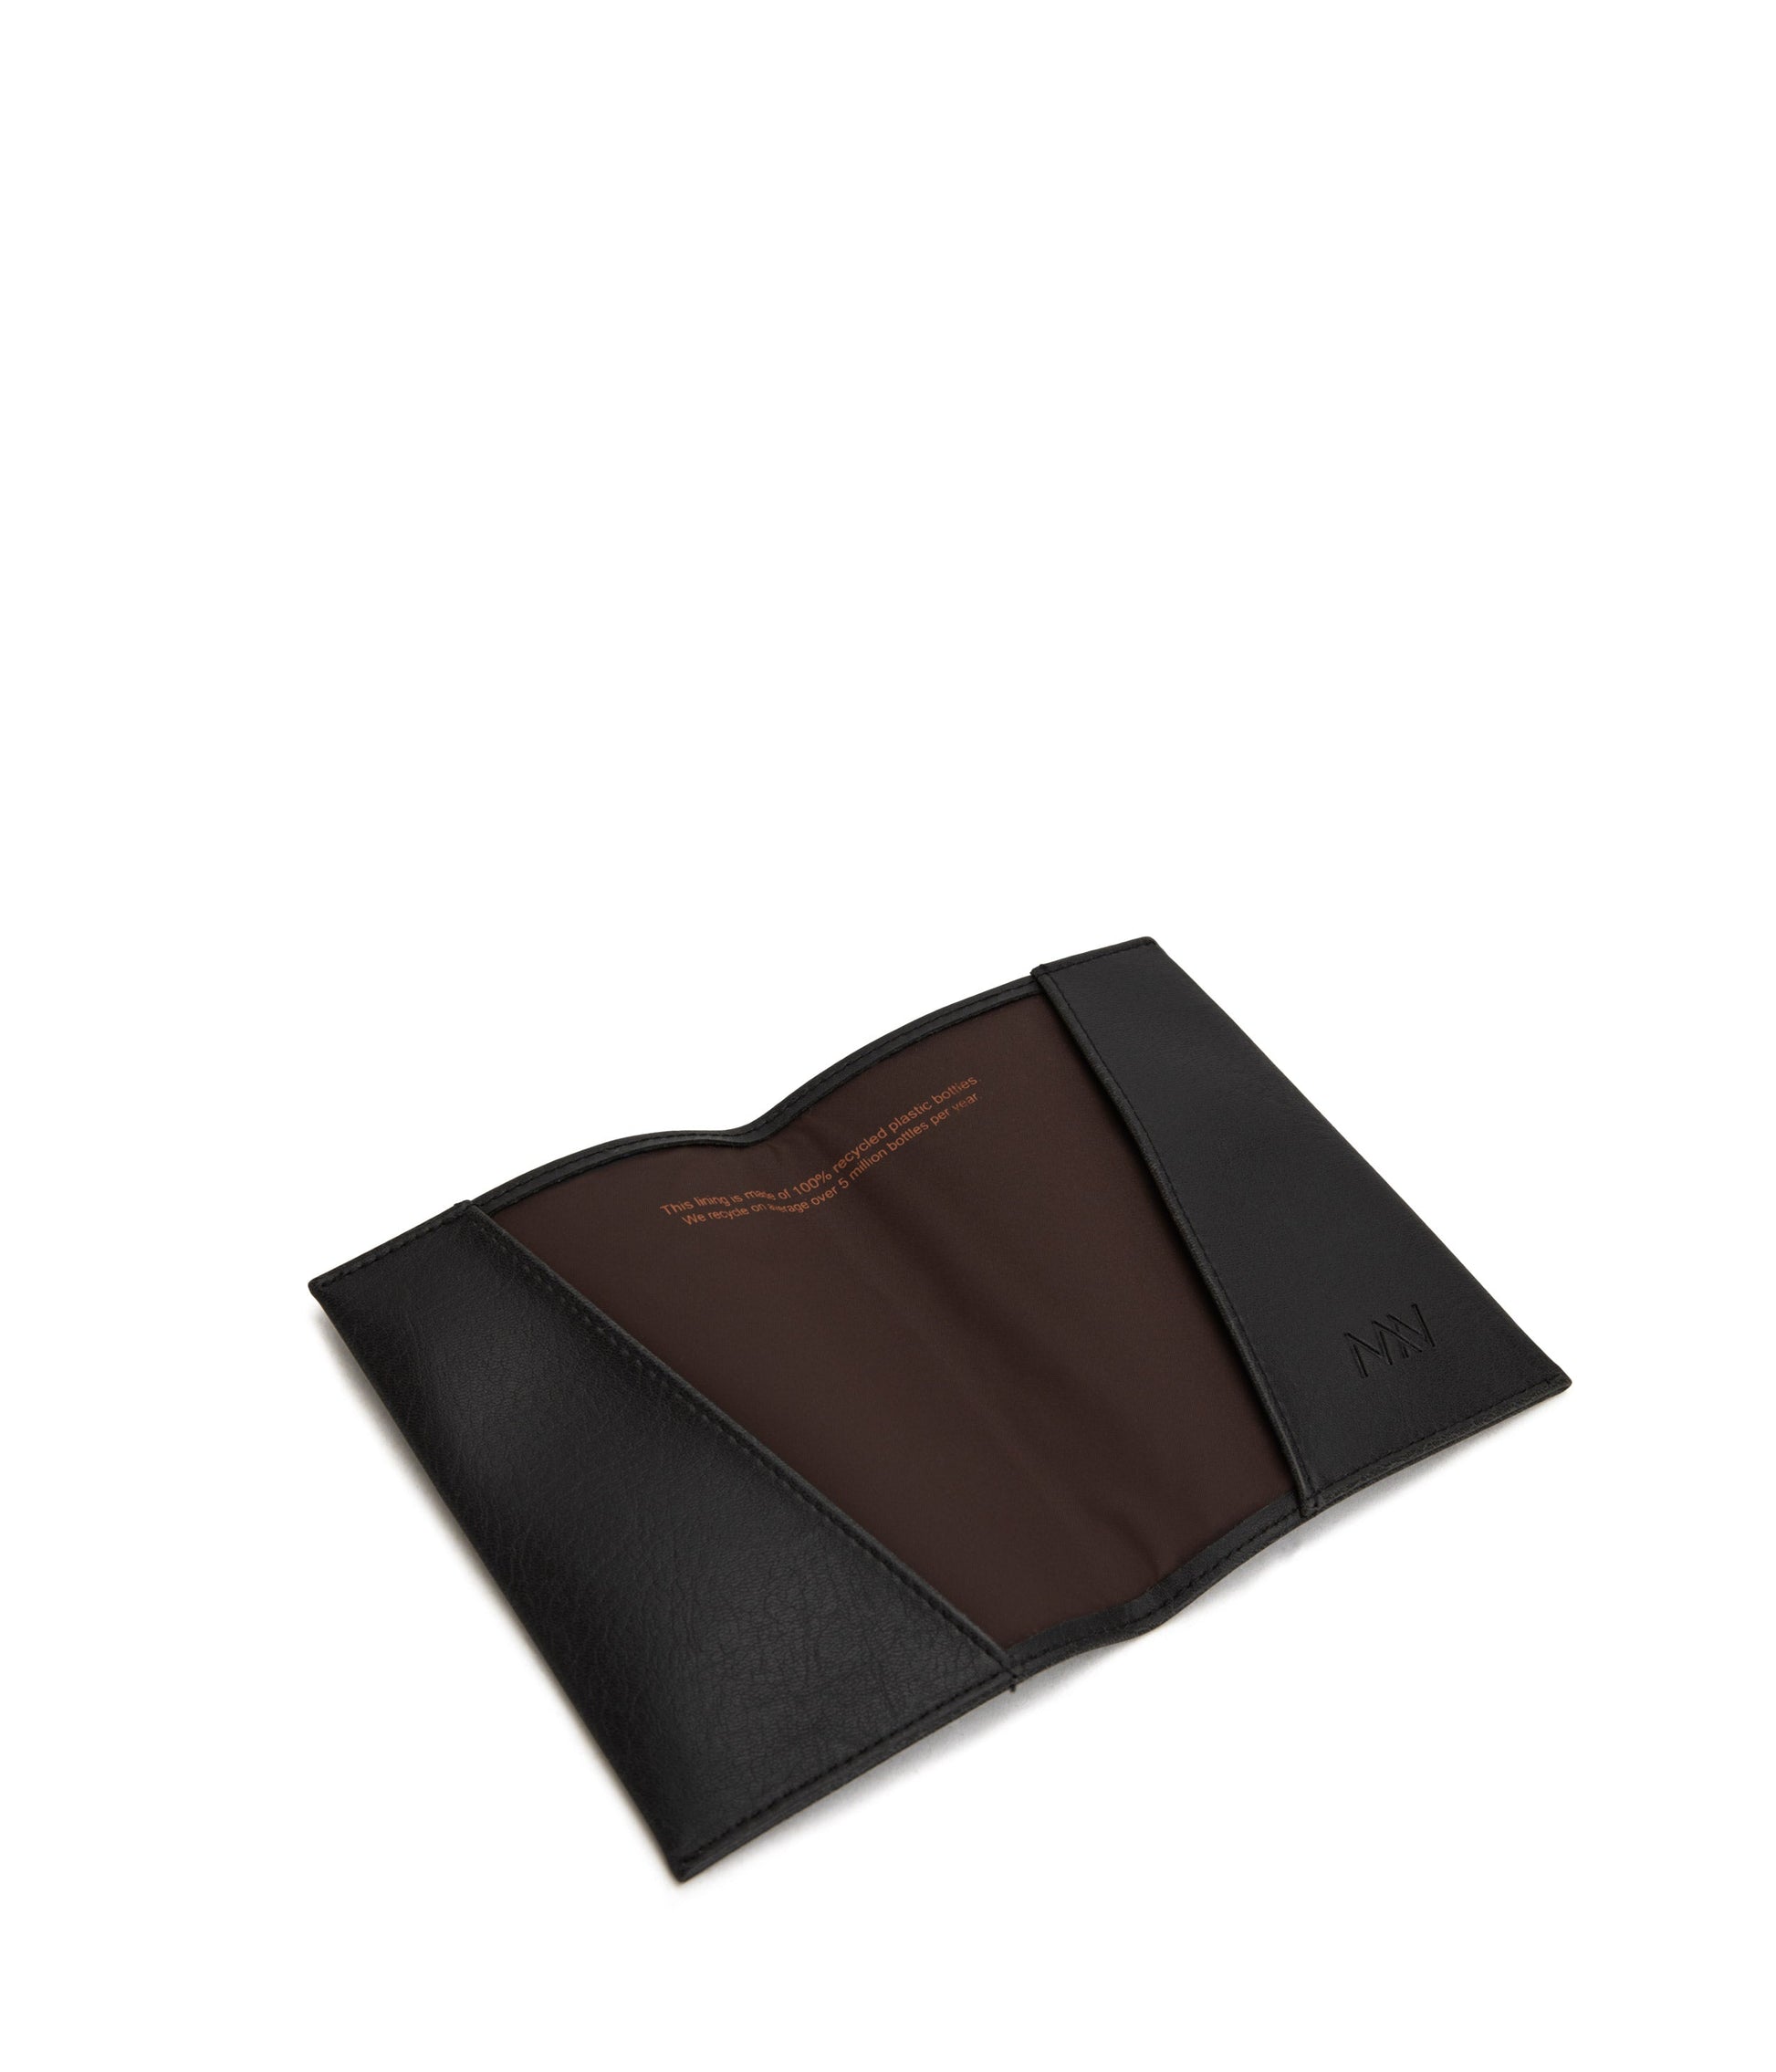 Celine - Passport Cover in Triomphe Canvas - Black / Brown - for Women